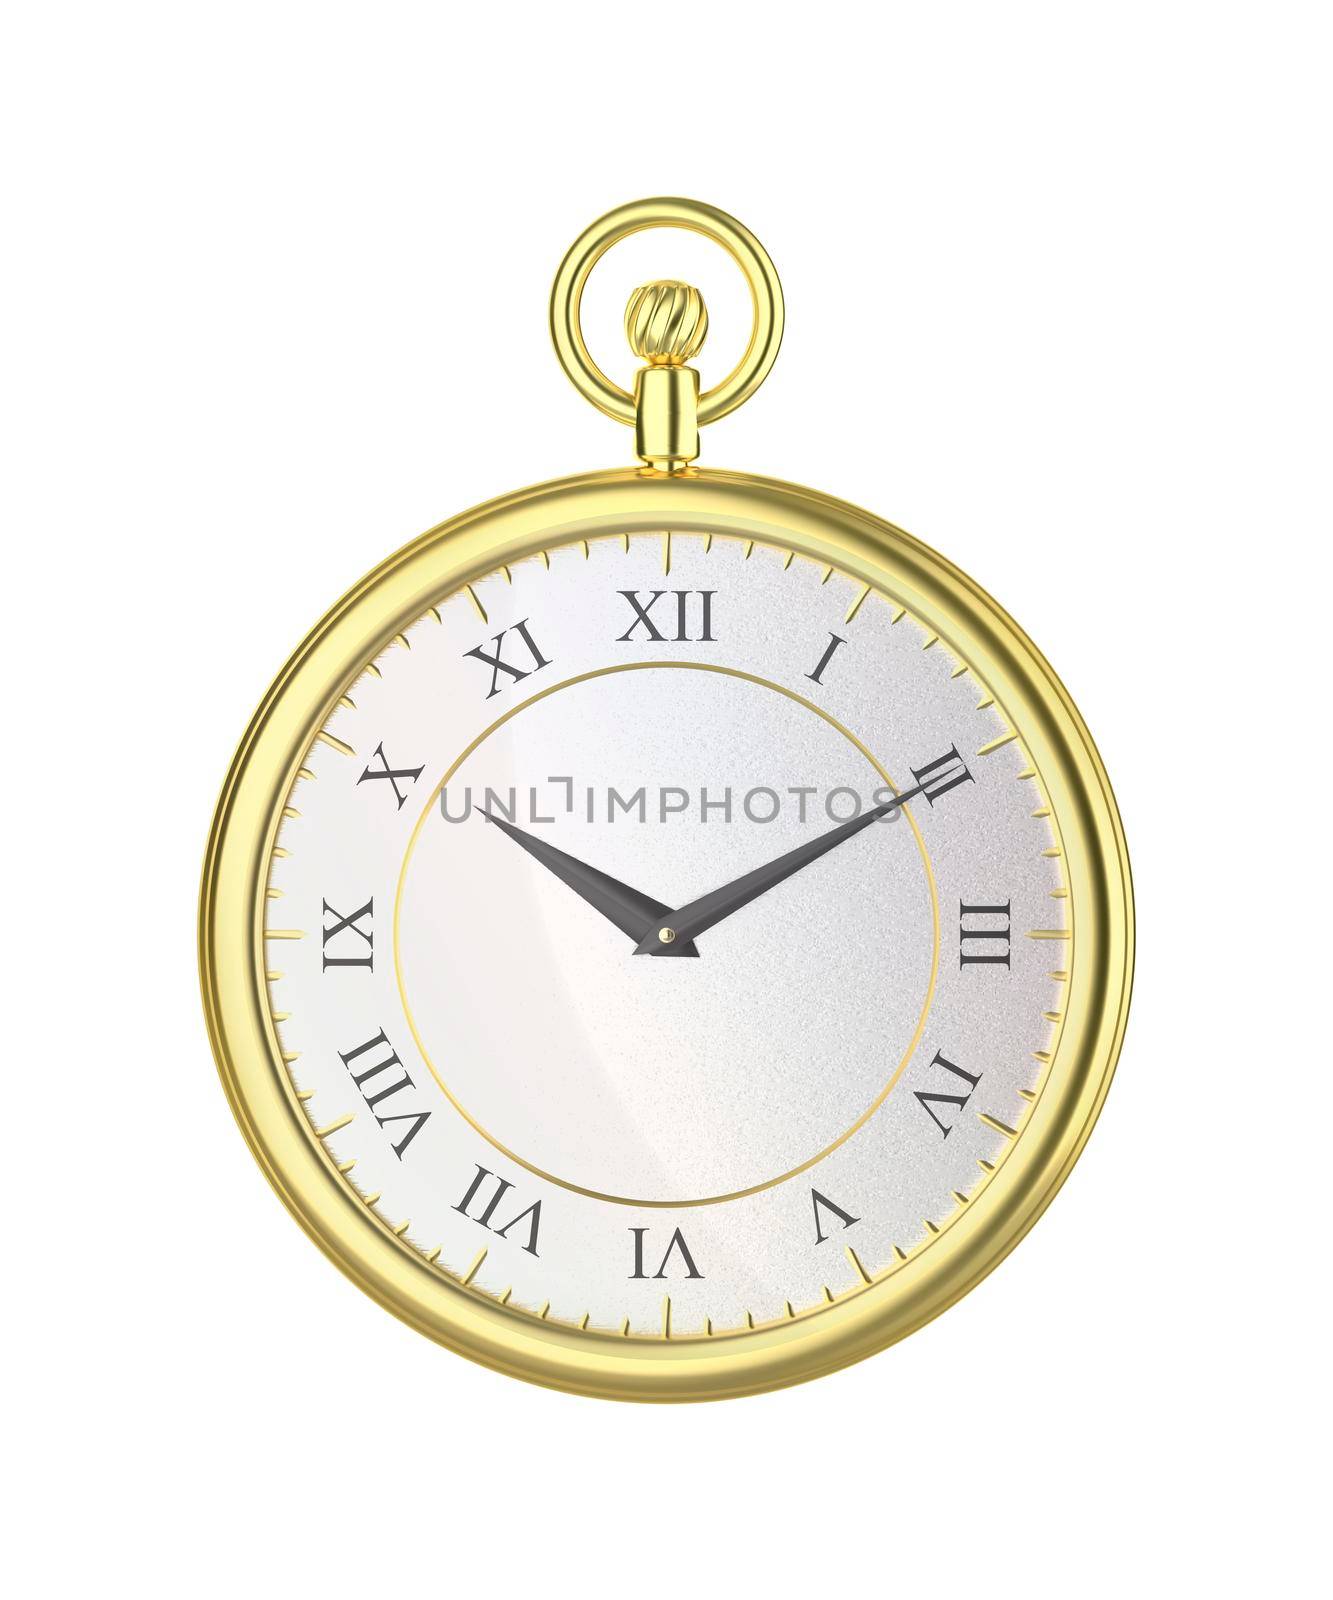 Luxury golden pocket watch by magraphics